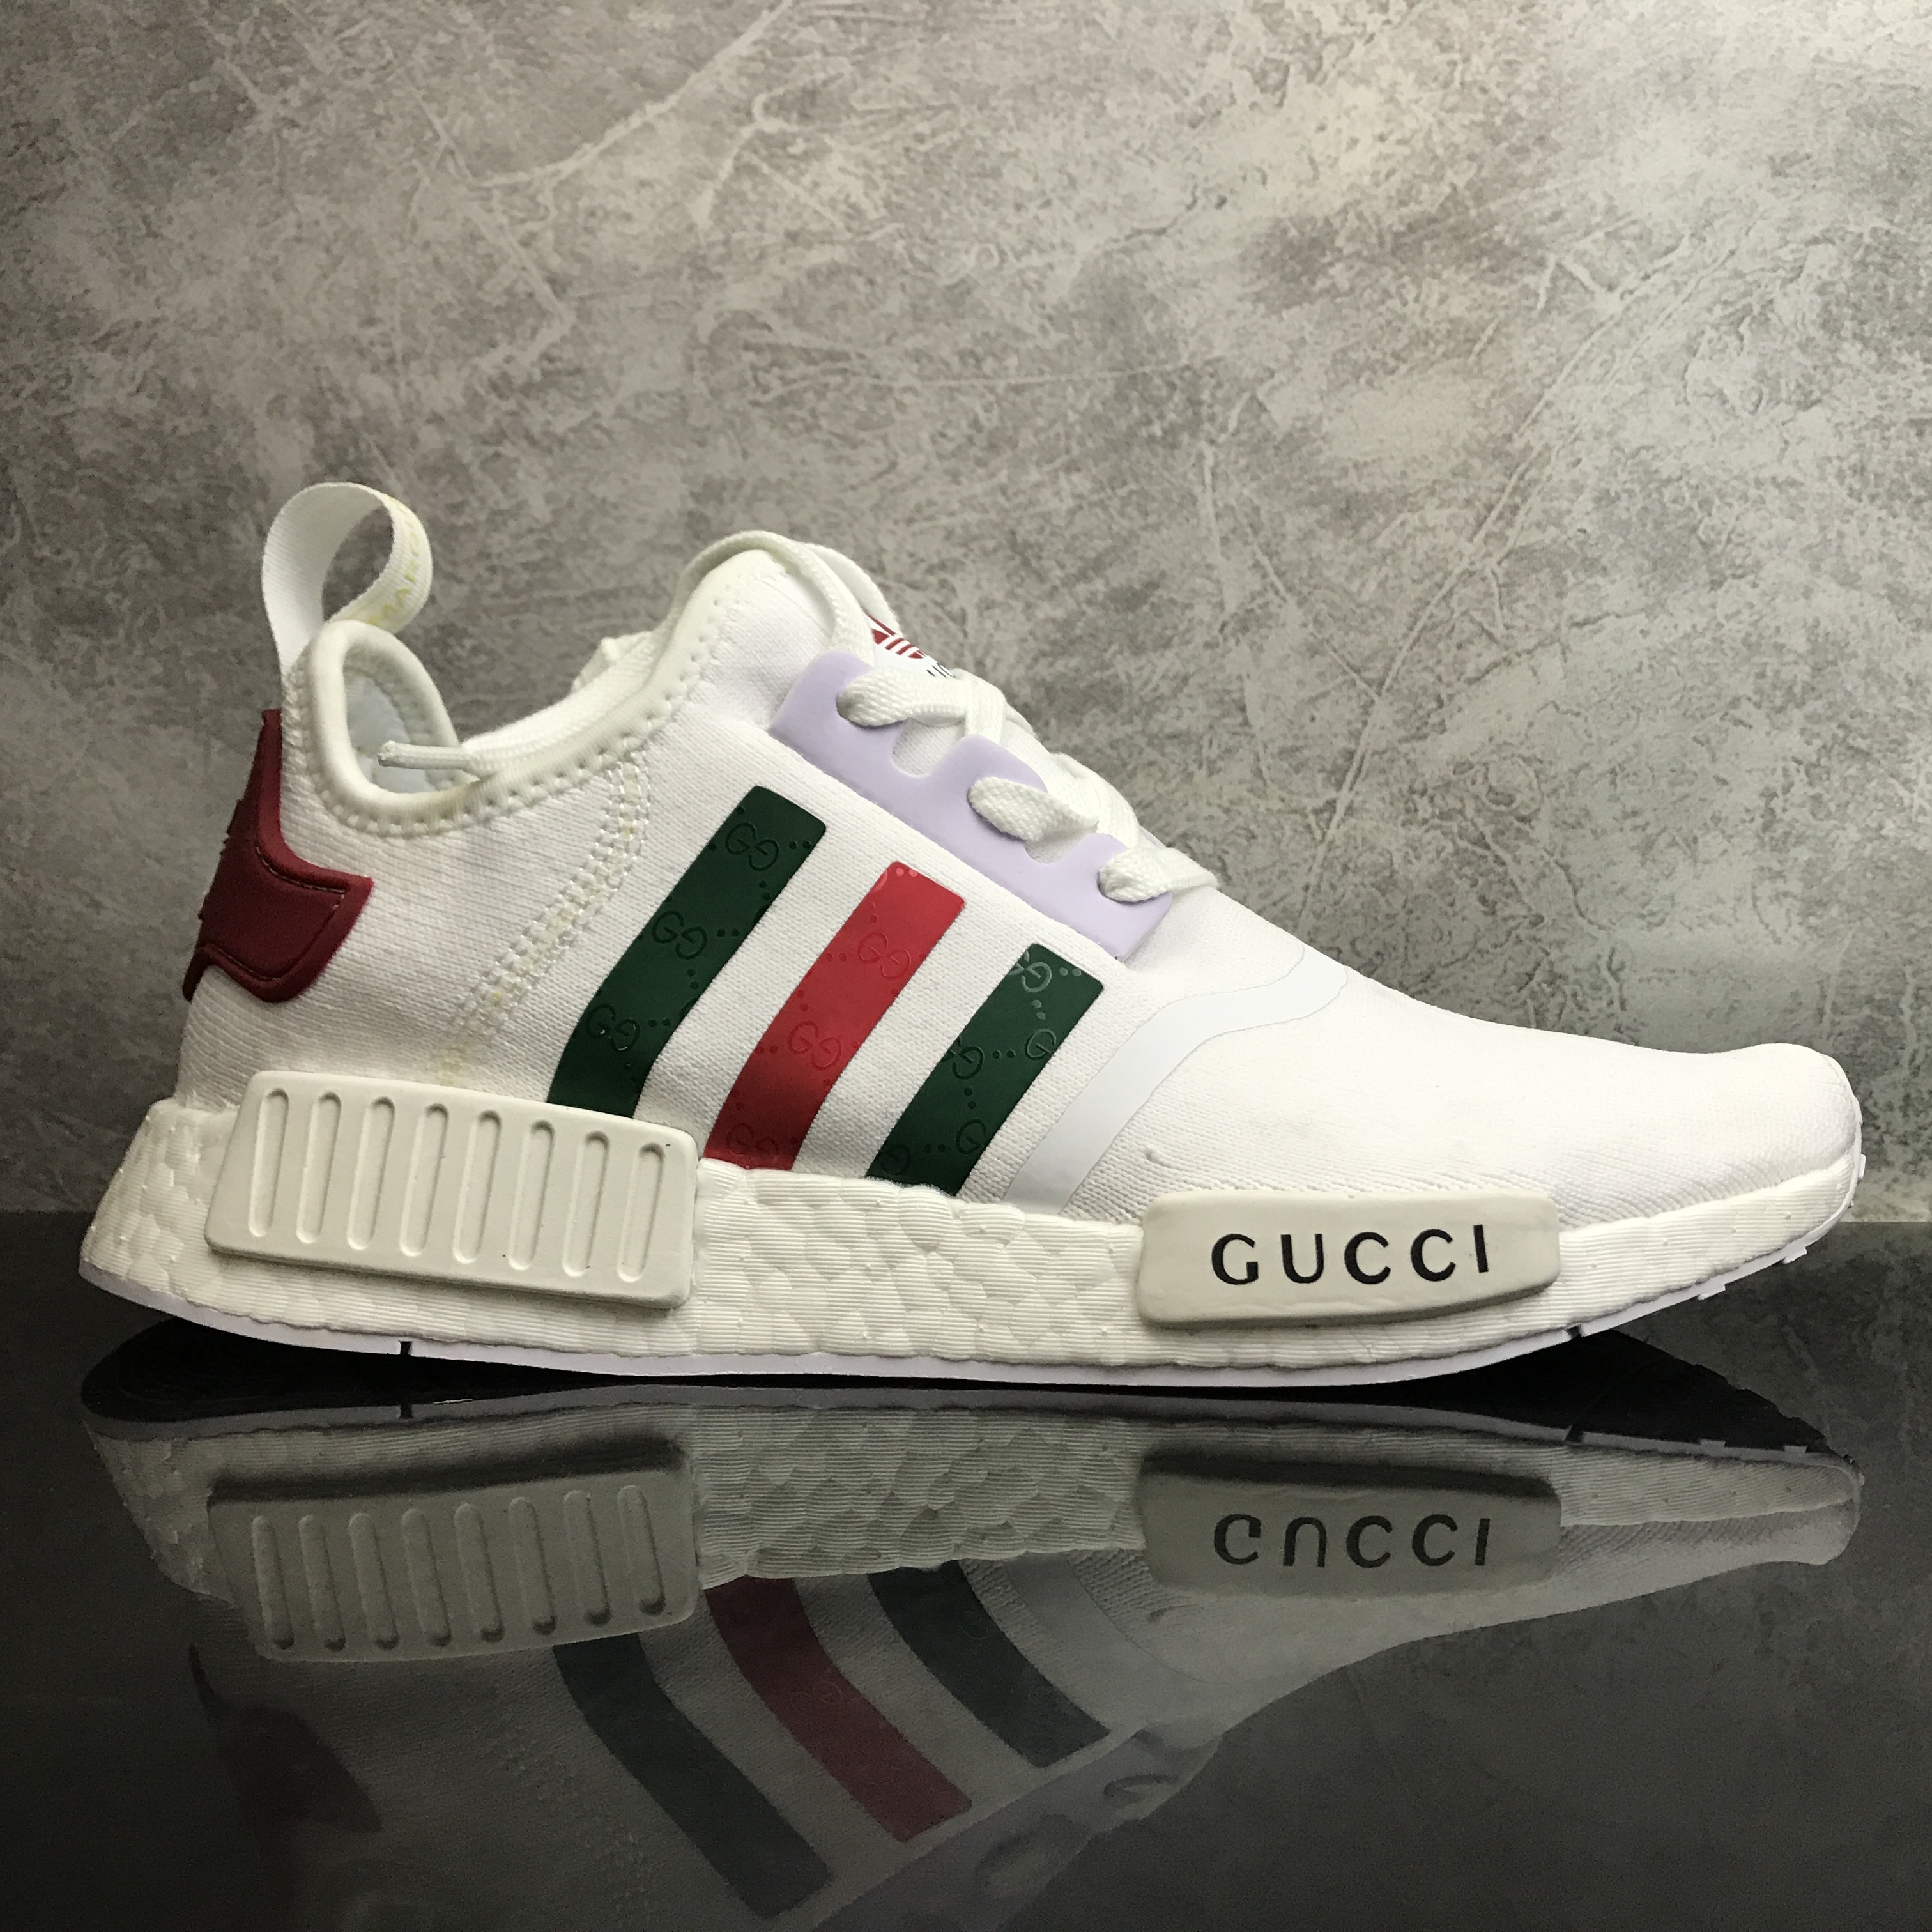 Adidas Nmd R1 PK Sneakersnstuff Gucci Glitch 1118233 from